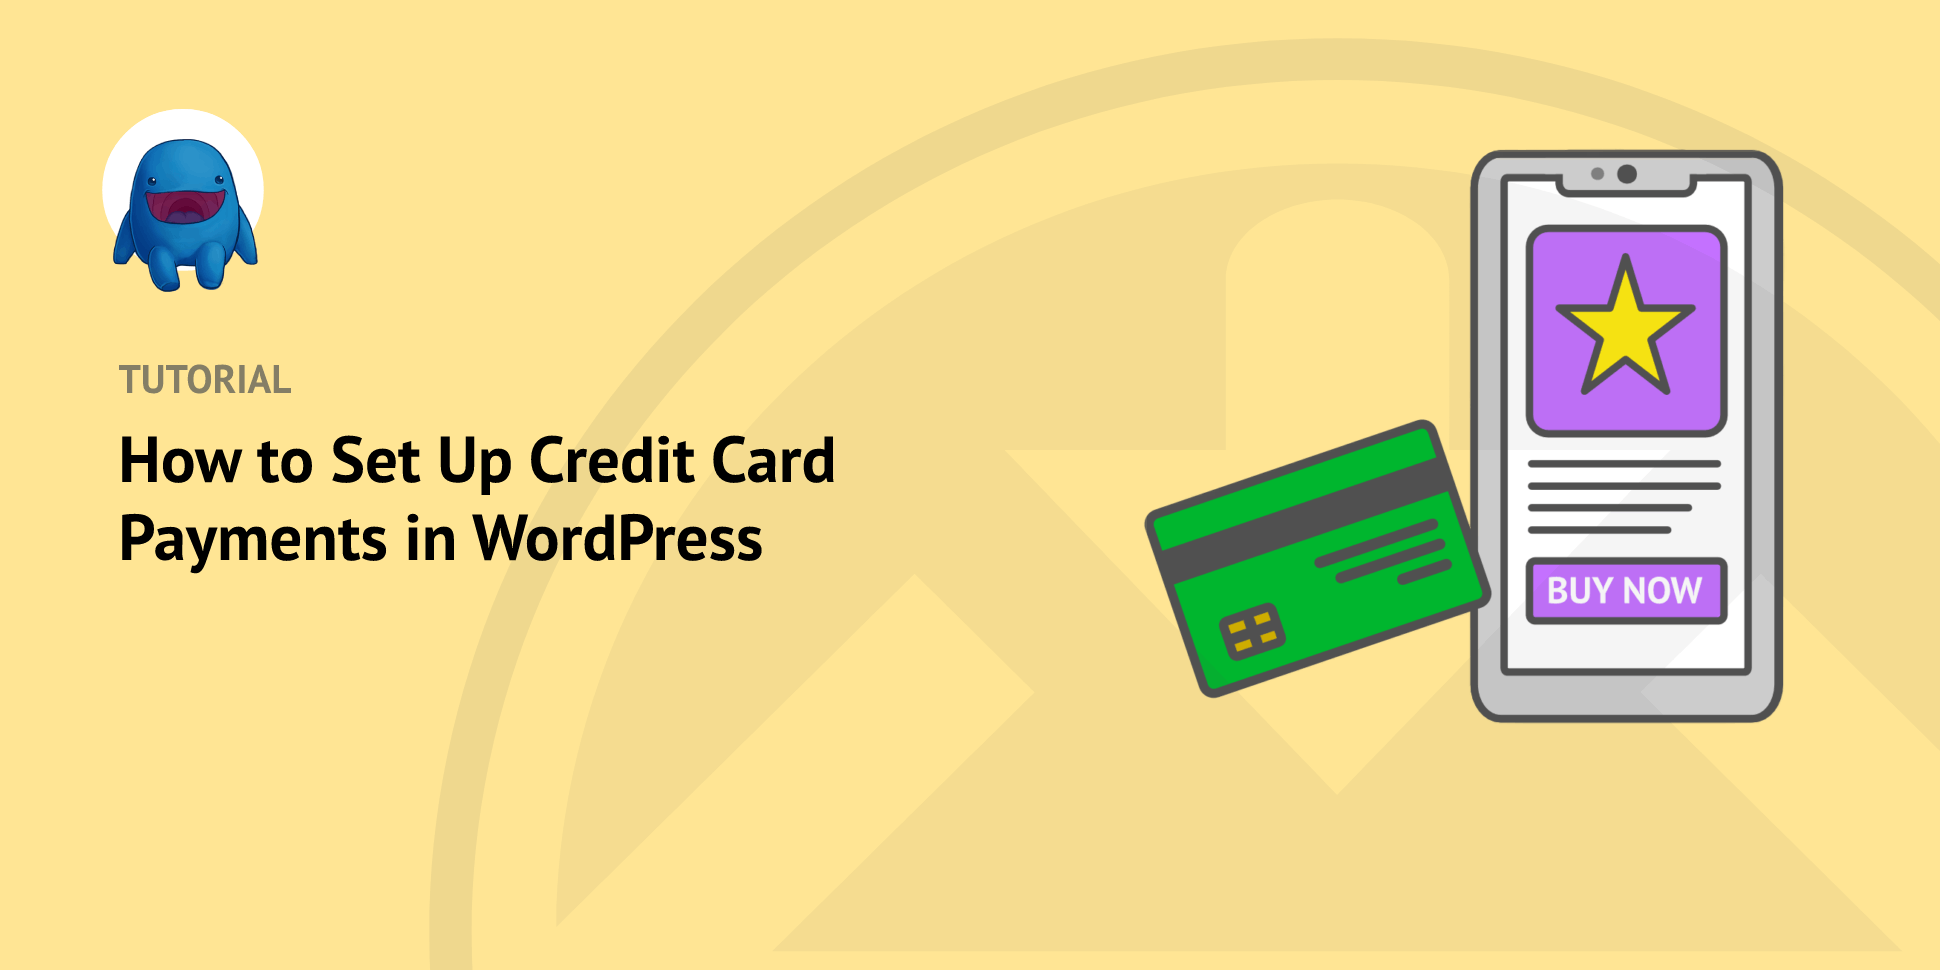 How to Set Up Credit Card Payments in WordPress